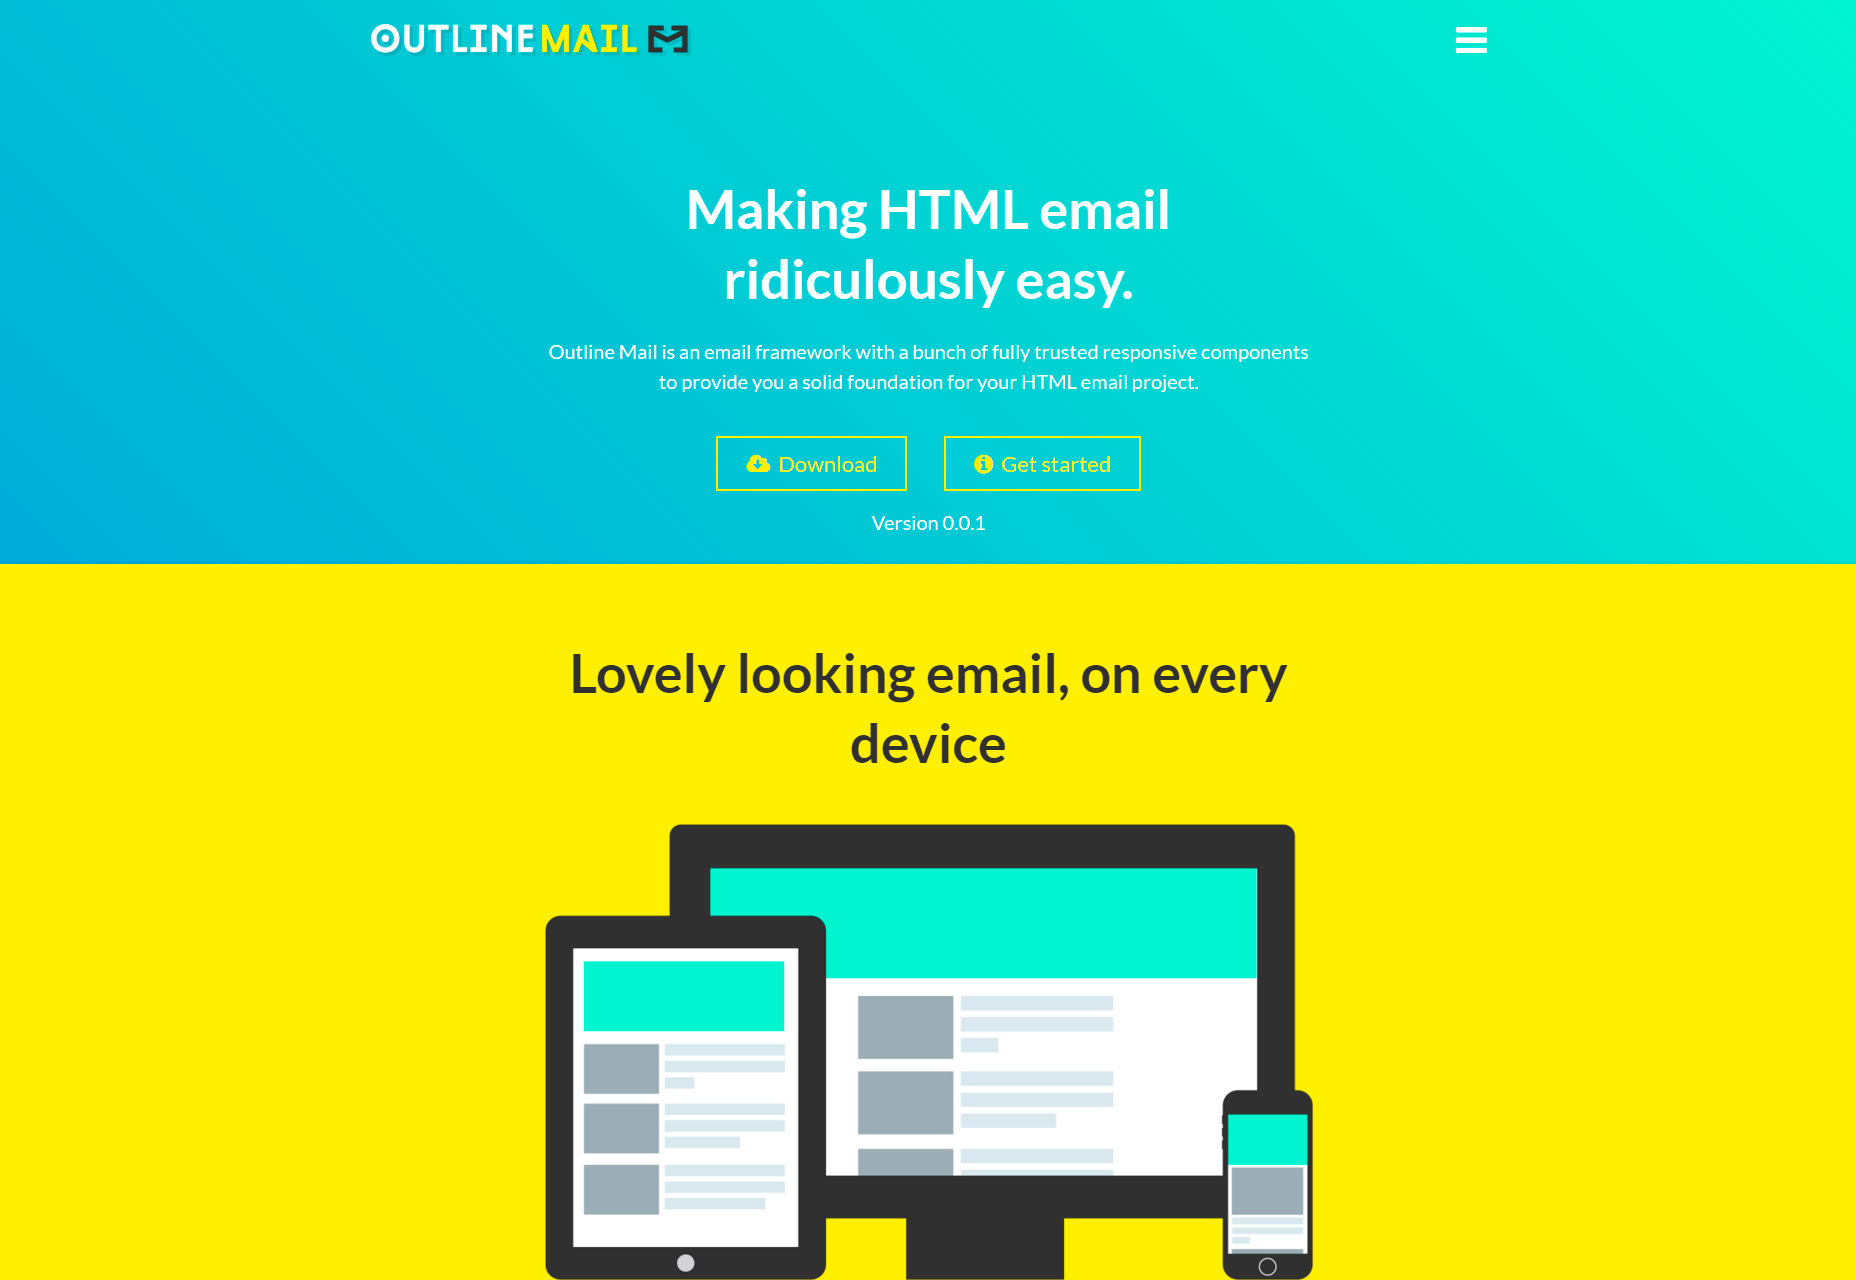 outline-mail-easy-html-email-templates